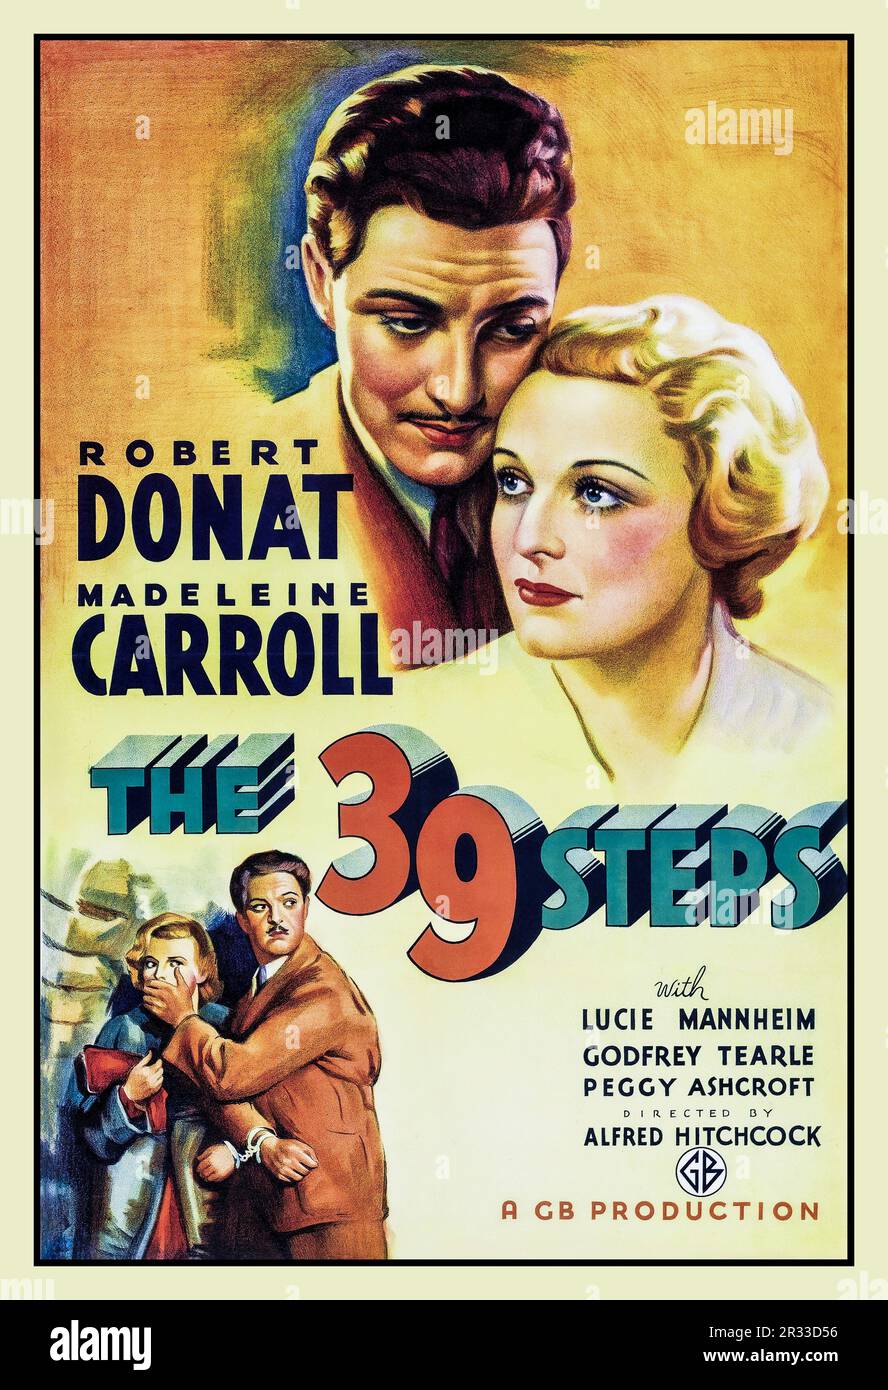 Vintage Movie Film Poster 'The 39 Steps' is 1935 British spy thriller film directed by Alfred Hitchcock, starring Robert Donat and Madeleine Carroll. It is loosely based on the 1915 novel The Thirty-Nine Steps by John Buchan.  Directed by Alfred Hitchcock Screenplay by Charles Bennett Ian Hay 1915 novel by John Buchan, Produced by Michael Balcon, Starring Robert Donat ,Madeleine Carroll,  Lucie Mannheim, Godfrey Tearle, Stock Photo